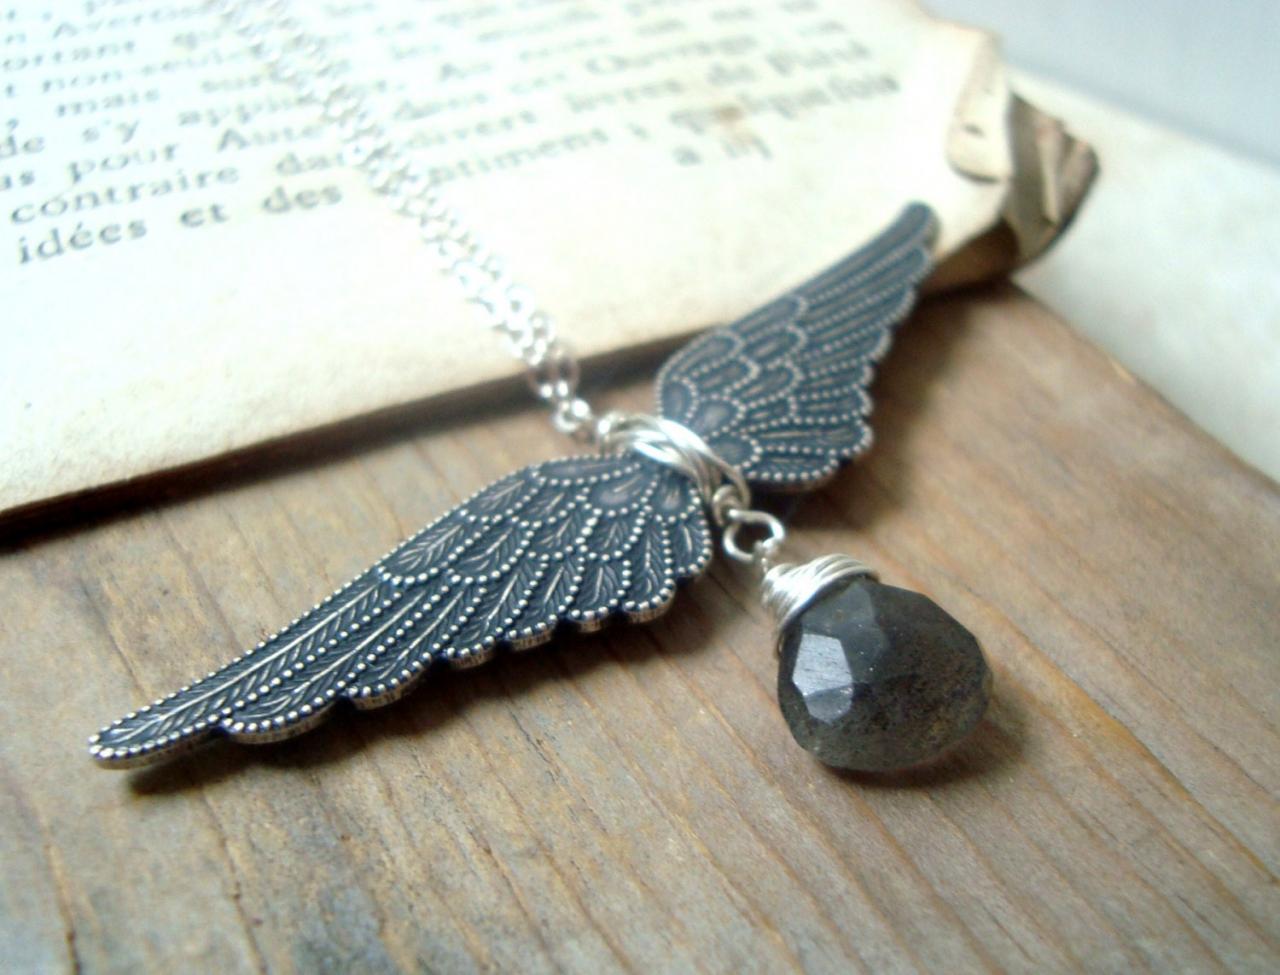 Winged Victory Necklace - Antiqued Silver and Rainbow Labradorite, Vintage Style Silver Angel Wing Necklace Art Nouveau Gifts Under 50 